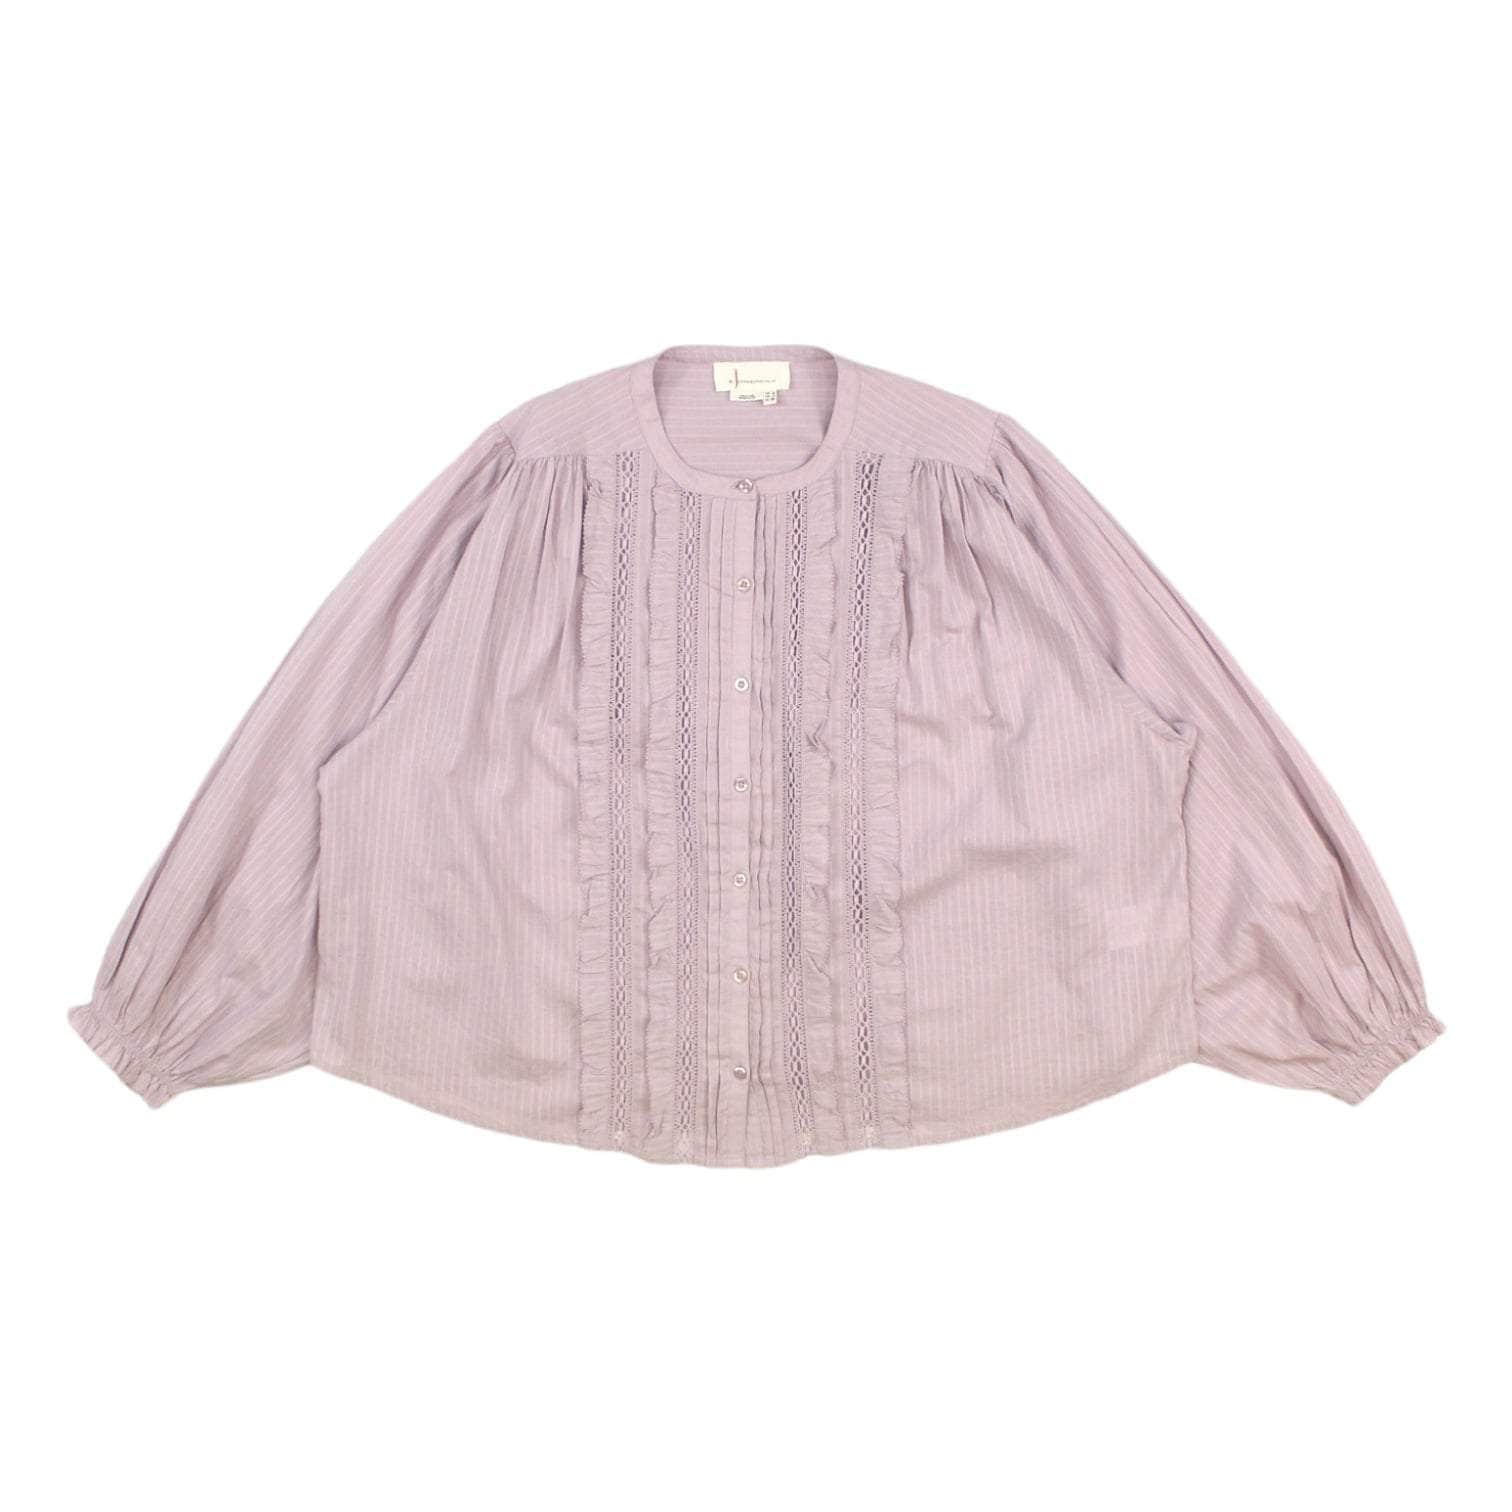 Anthropologie Lilac Ruffle & Lace Blouse